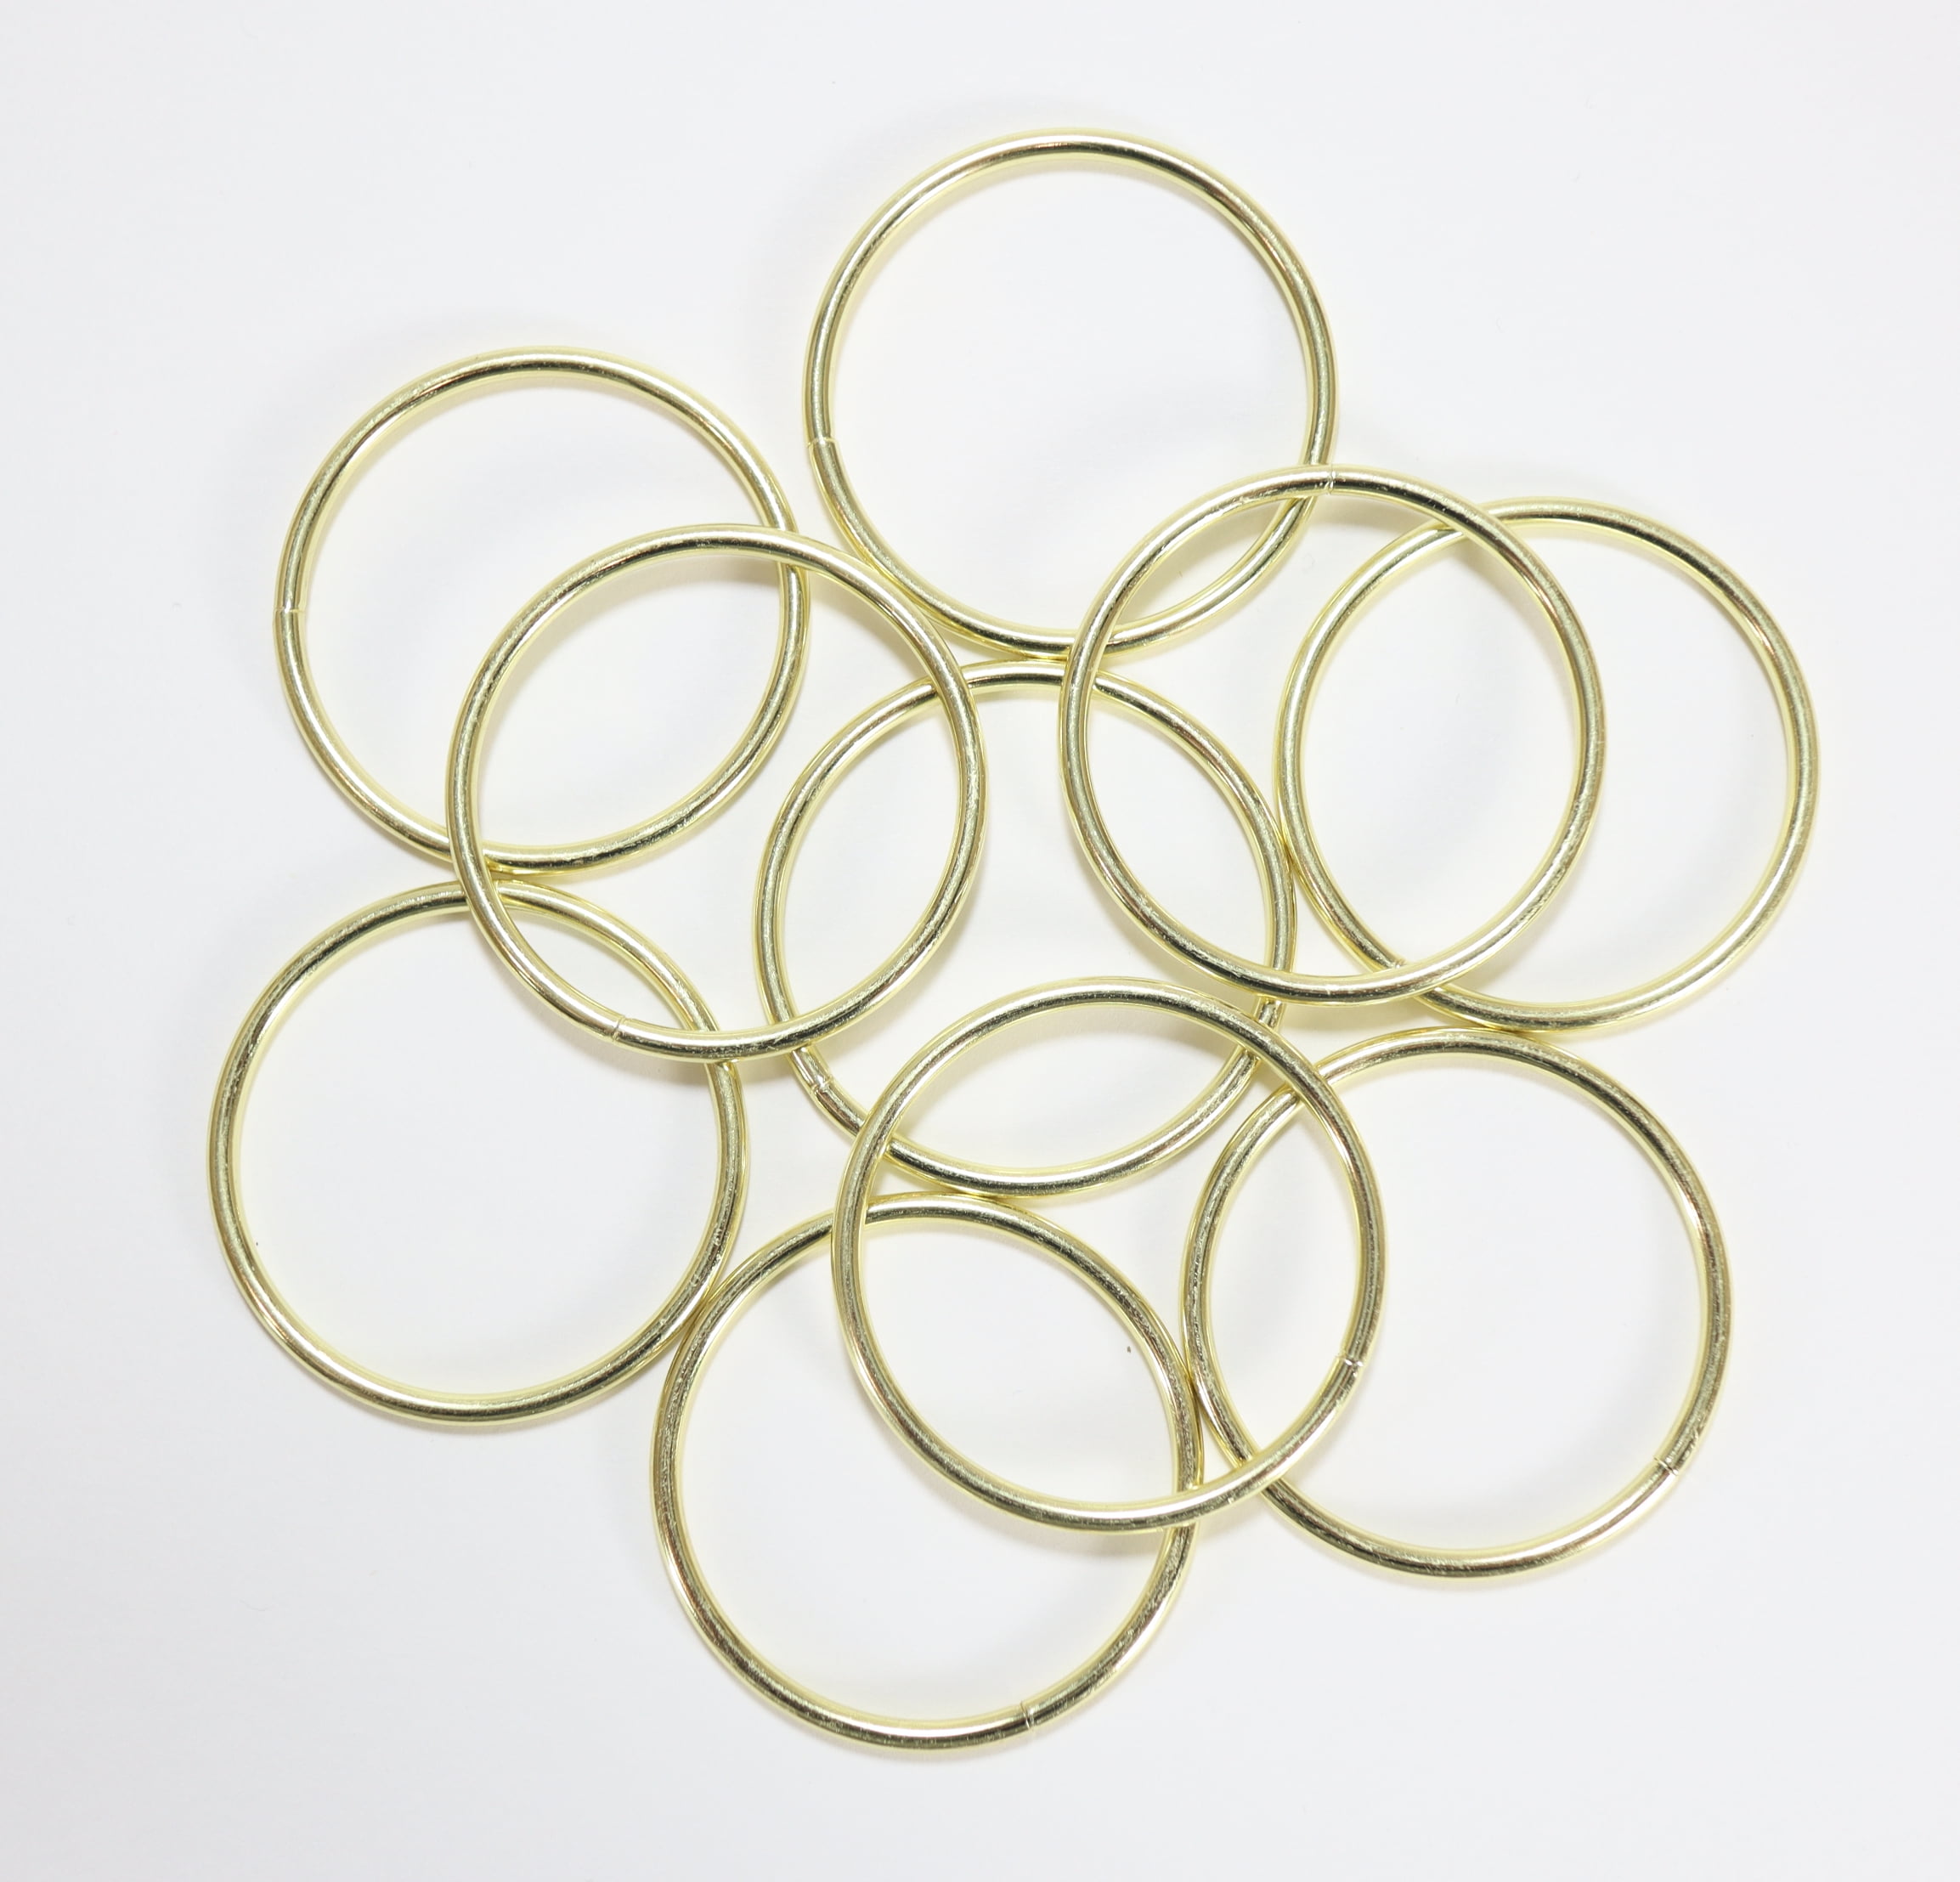 10 Inch Gold Metal Rings Hoops for Crafts Bulk Wholesale 6 Pieces